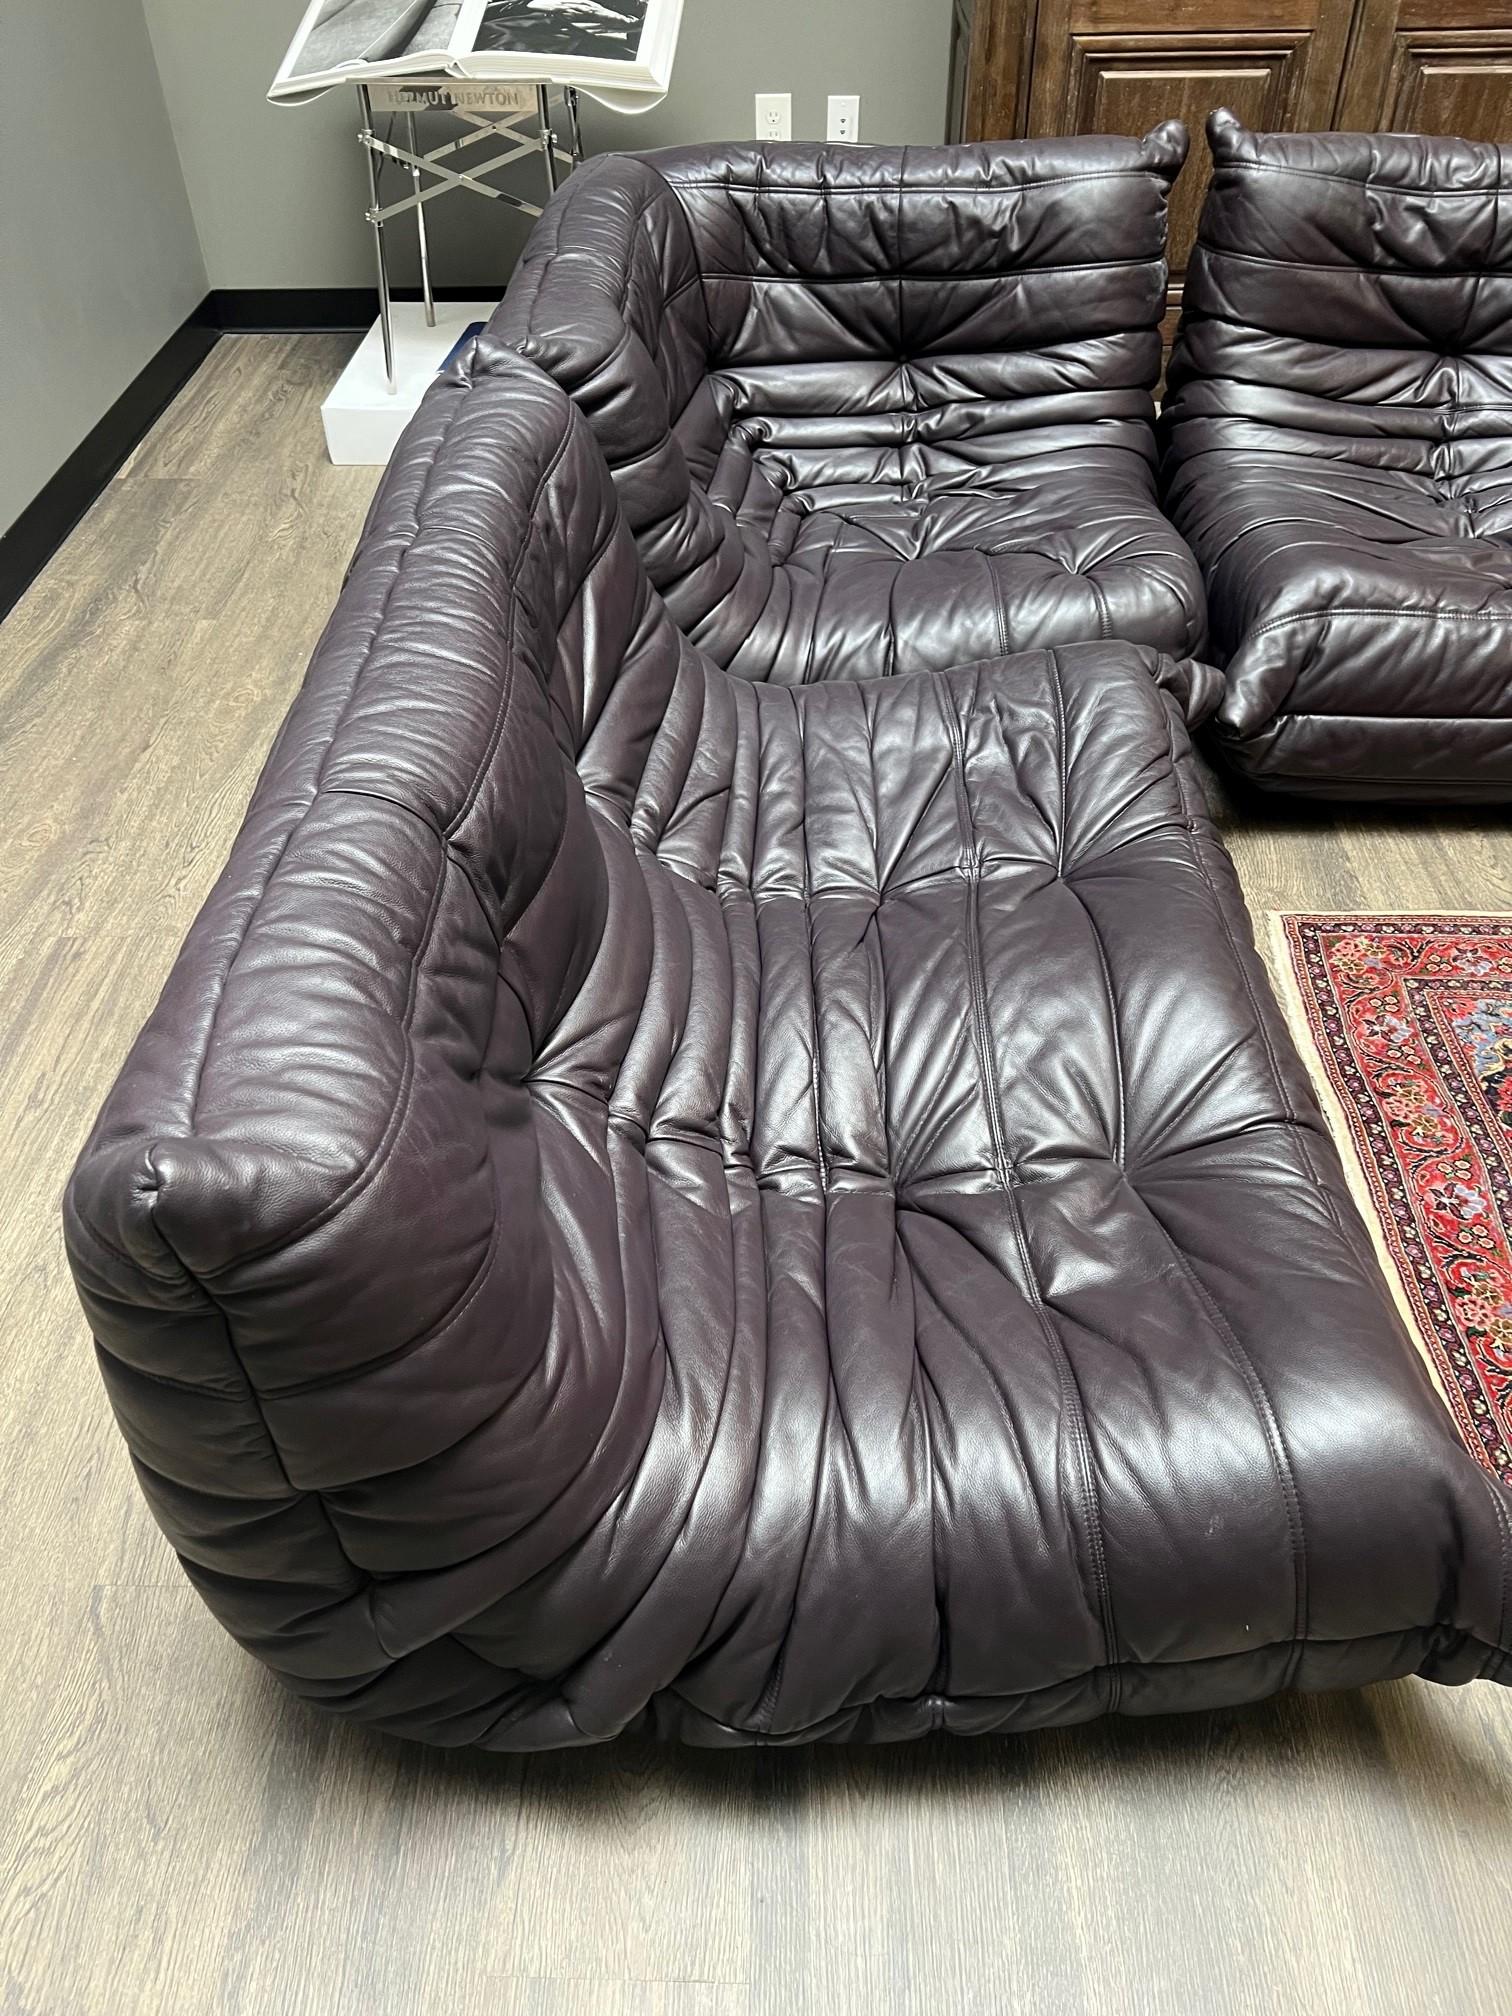 This wonderful Michel Ducaroy for Ligne Roset, 'Togo' Sectional Sofa is has deep and rich plum color.

This particular one is a Three-piece 'Togo' sectional sofa, circa from the 1970s

The sectional is made with Leather and Polyurethane foam and